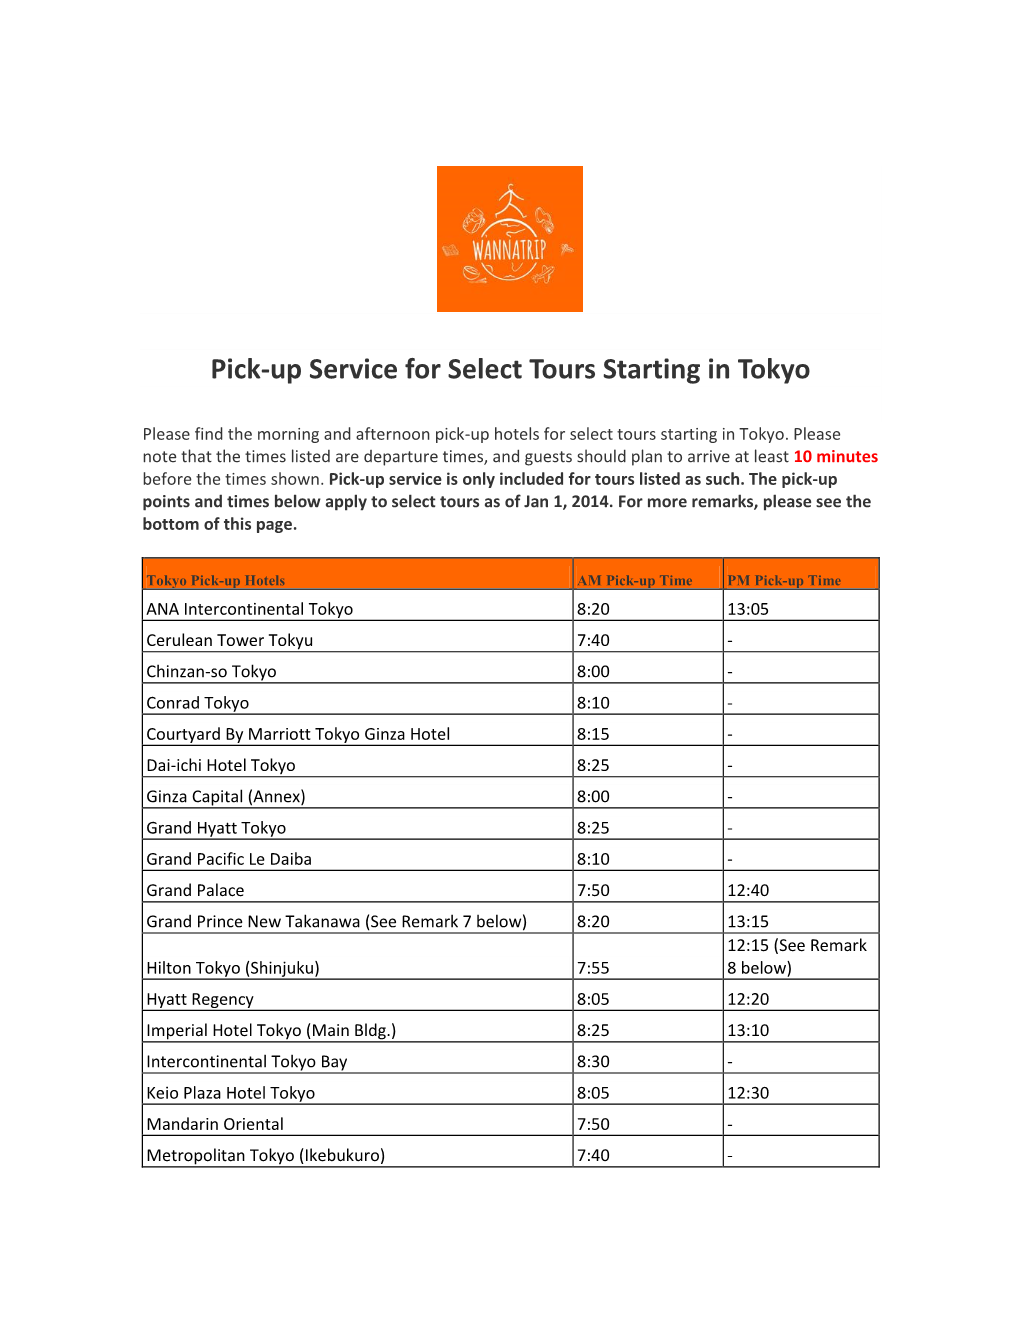 Pick-Up Service for Select Tours Starting in Tokyo